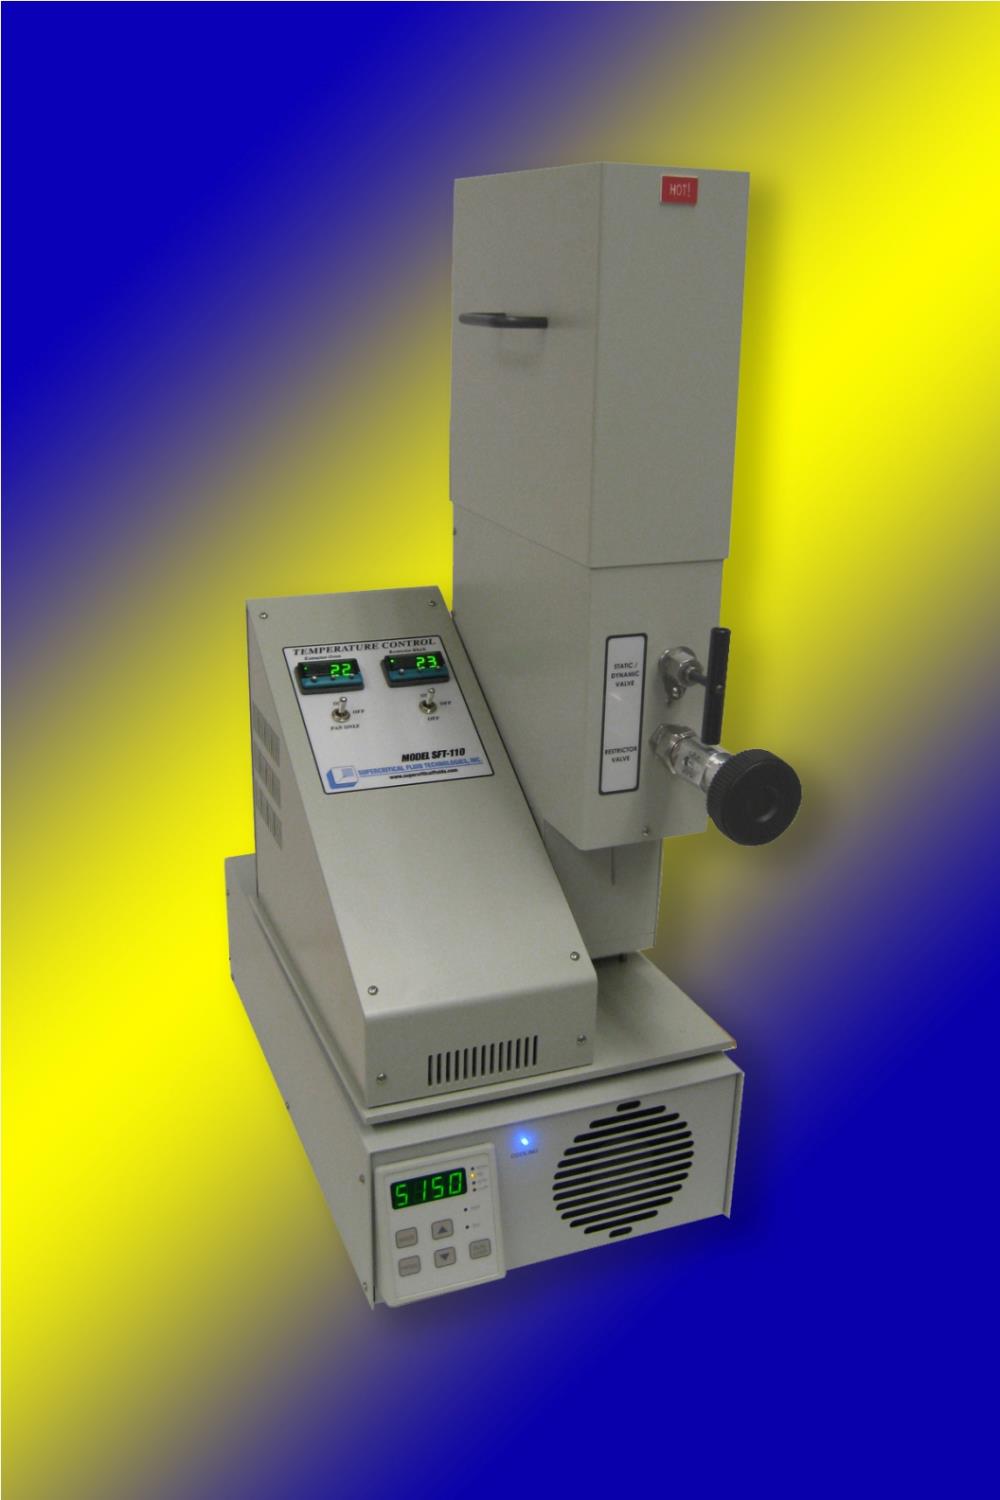 Supercritical Fluid Extraction,Supercritical fluid extraction,Supercritical Fluid Technology,Instruments and Controls/Laboratory Equipment